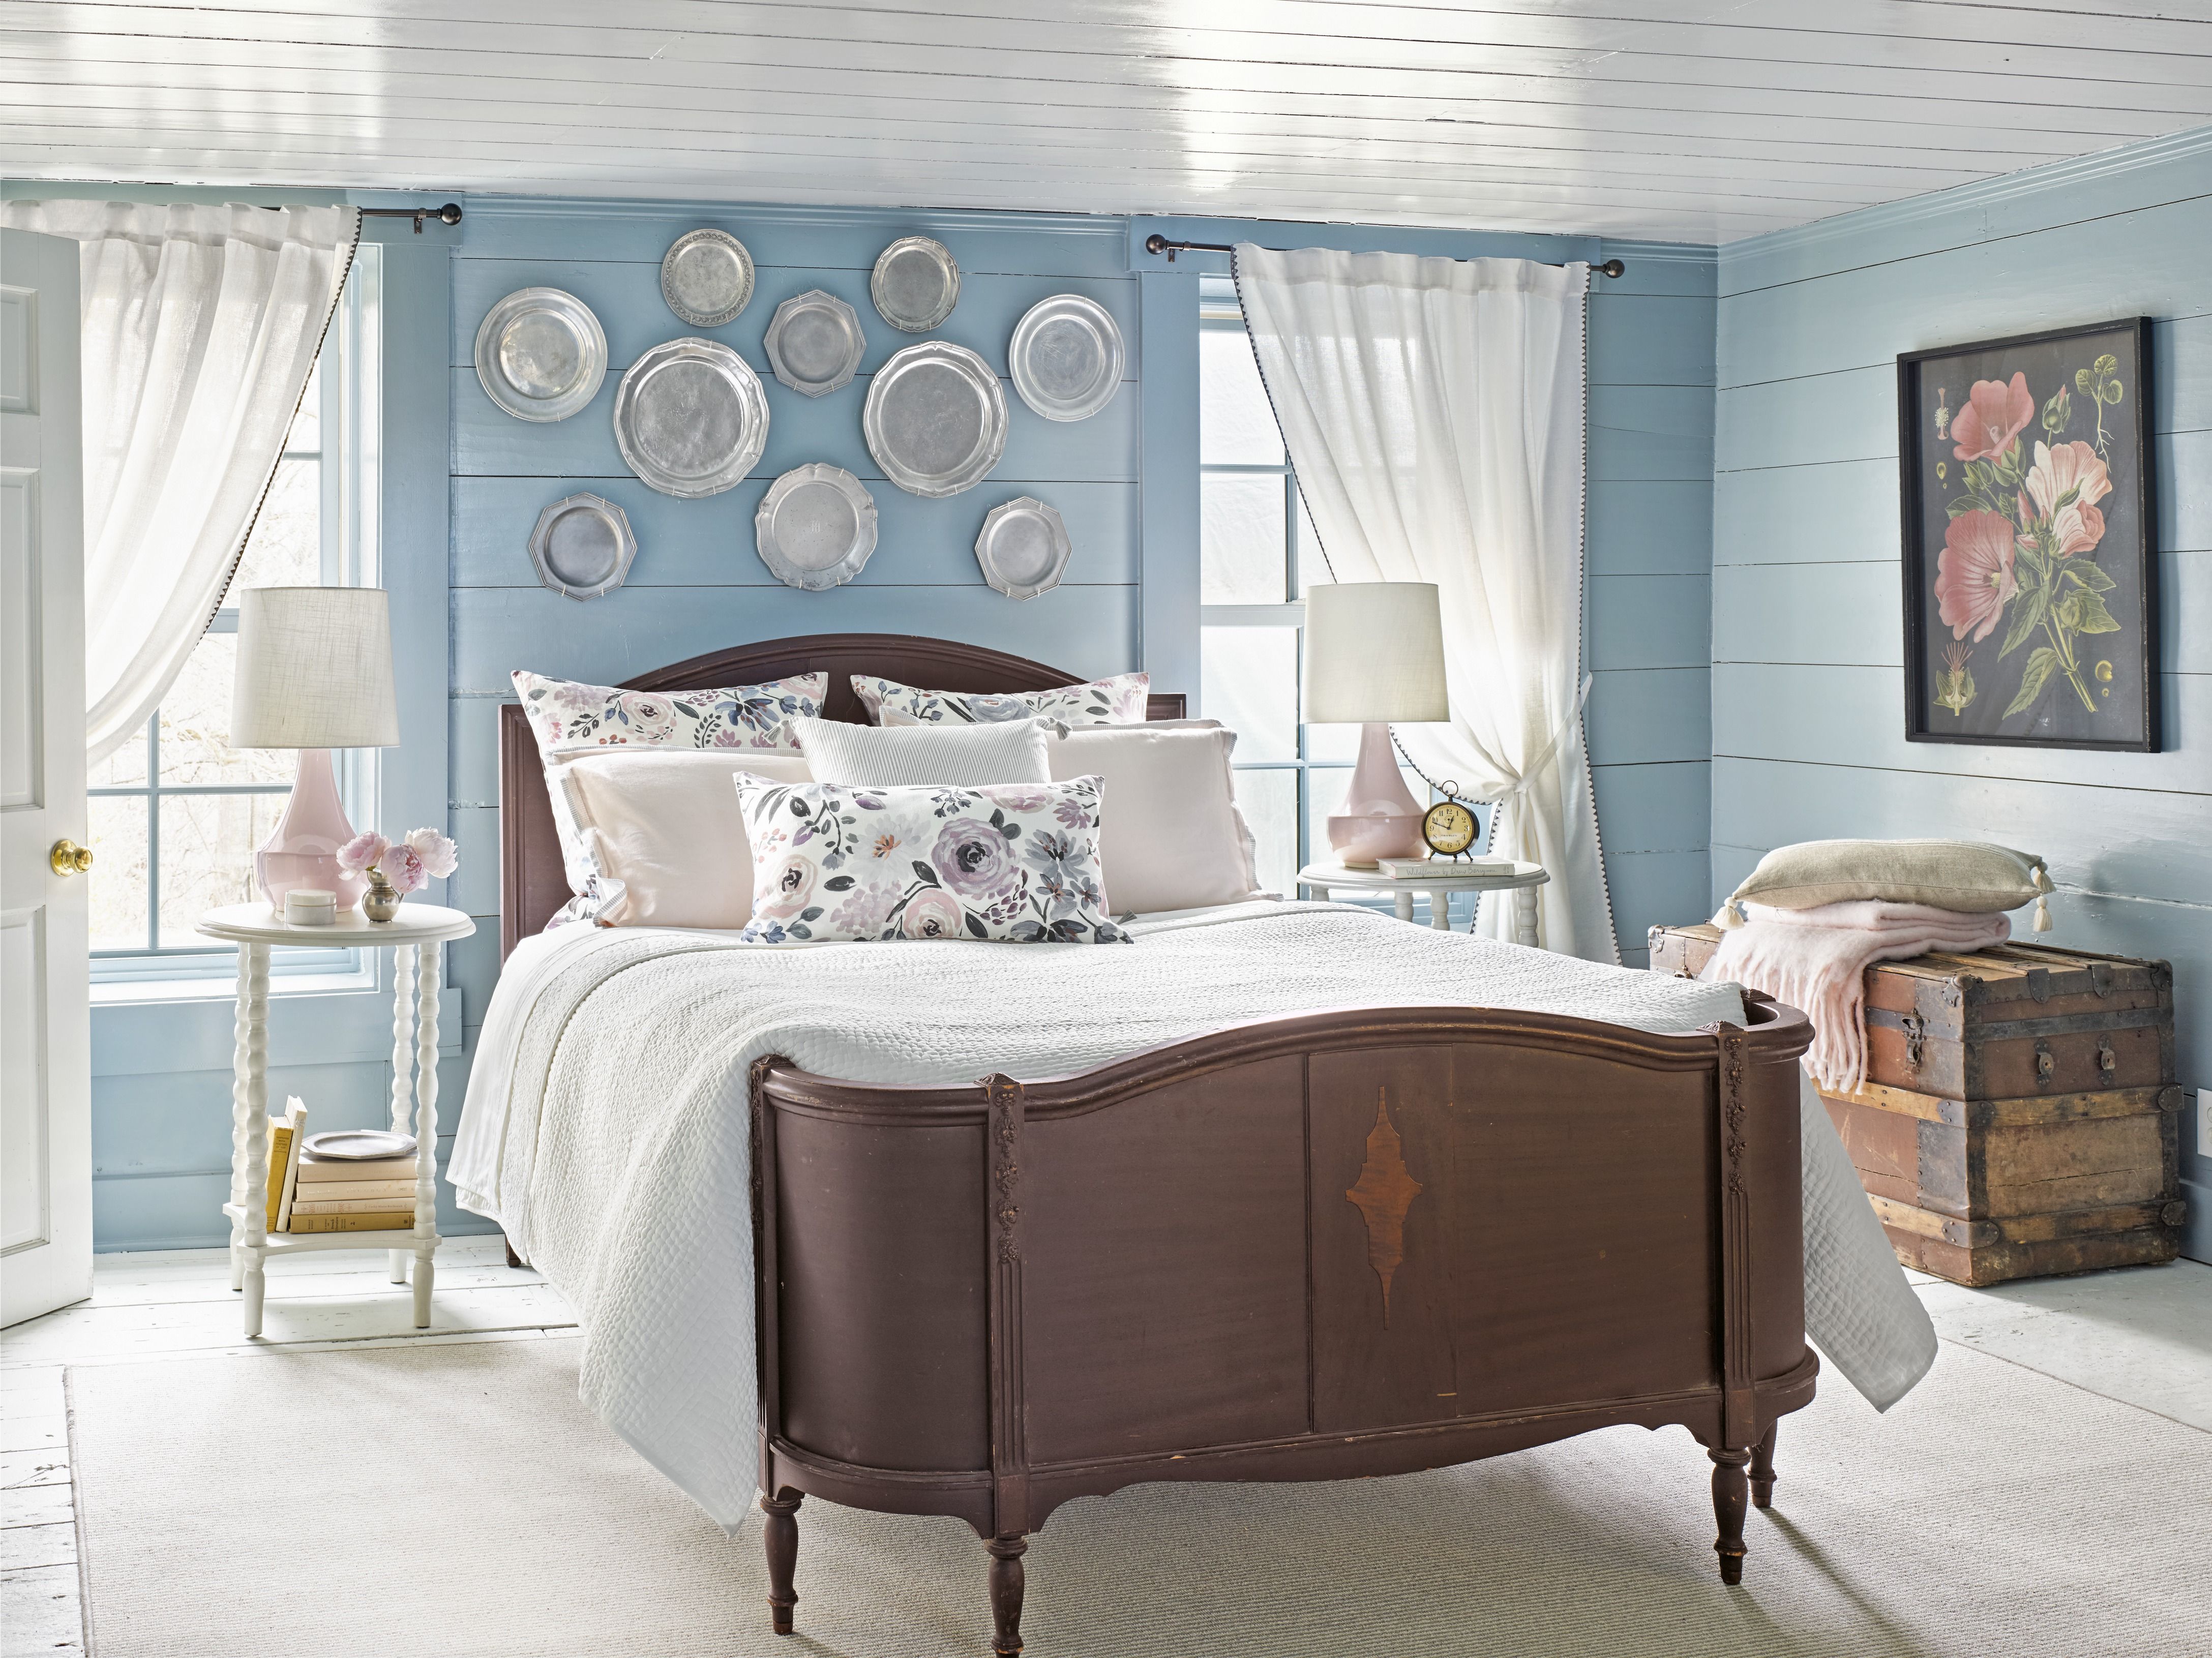 32 Best Paint Colors for Small Rooms - Painting Small Rooms